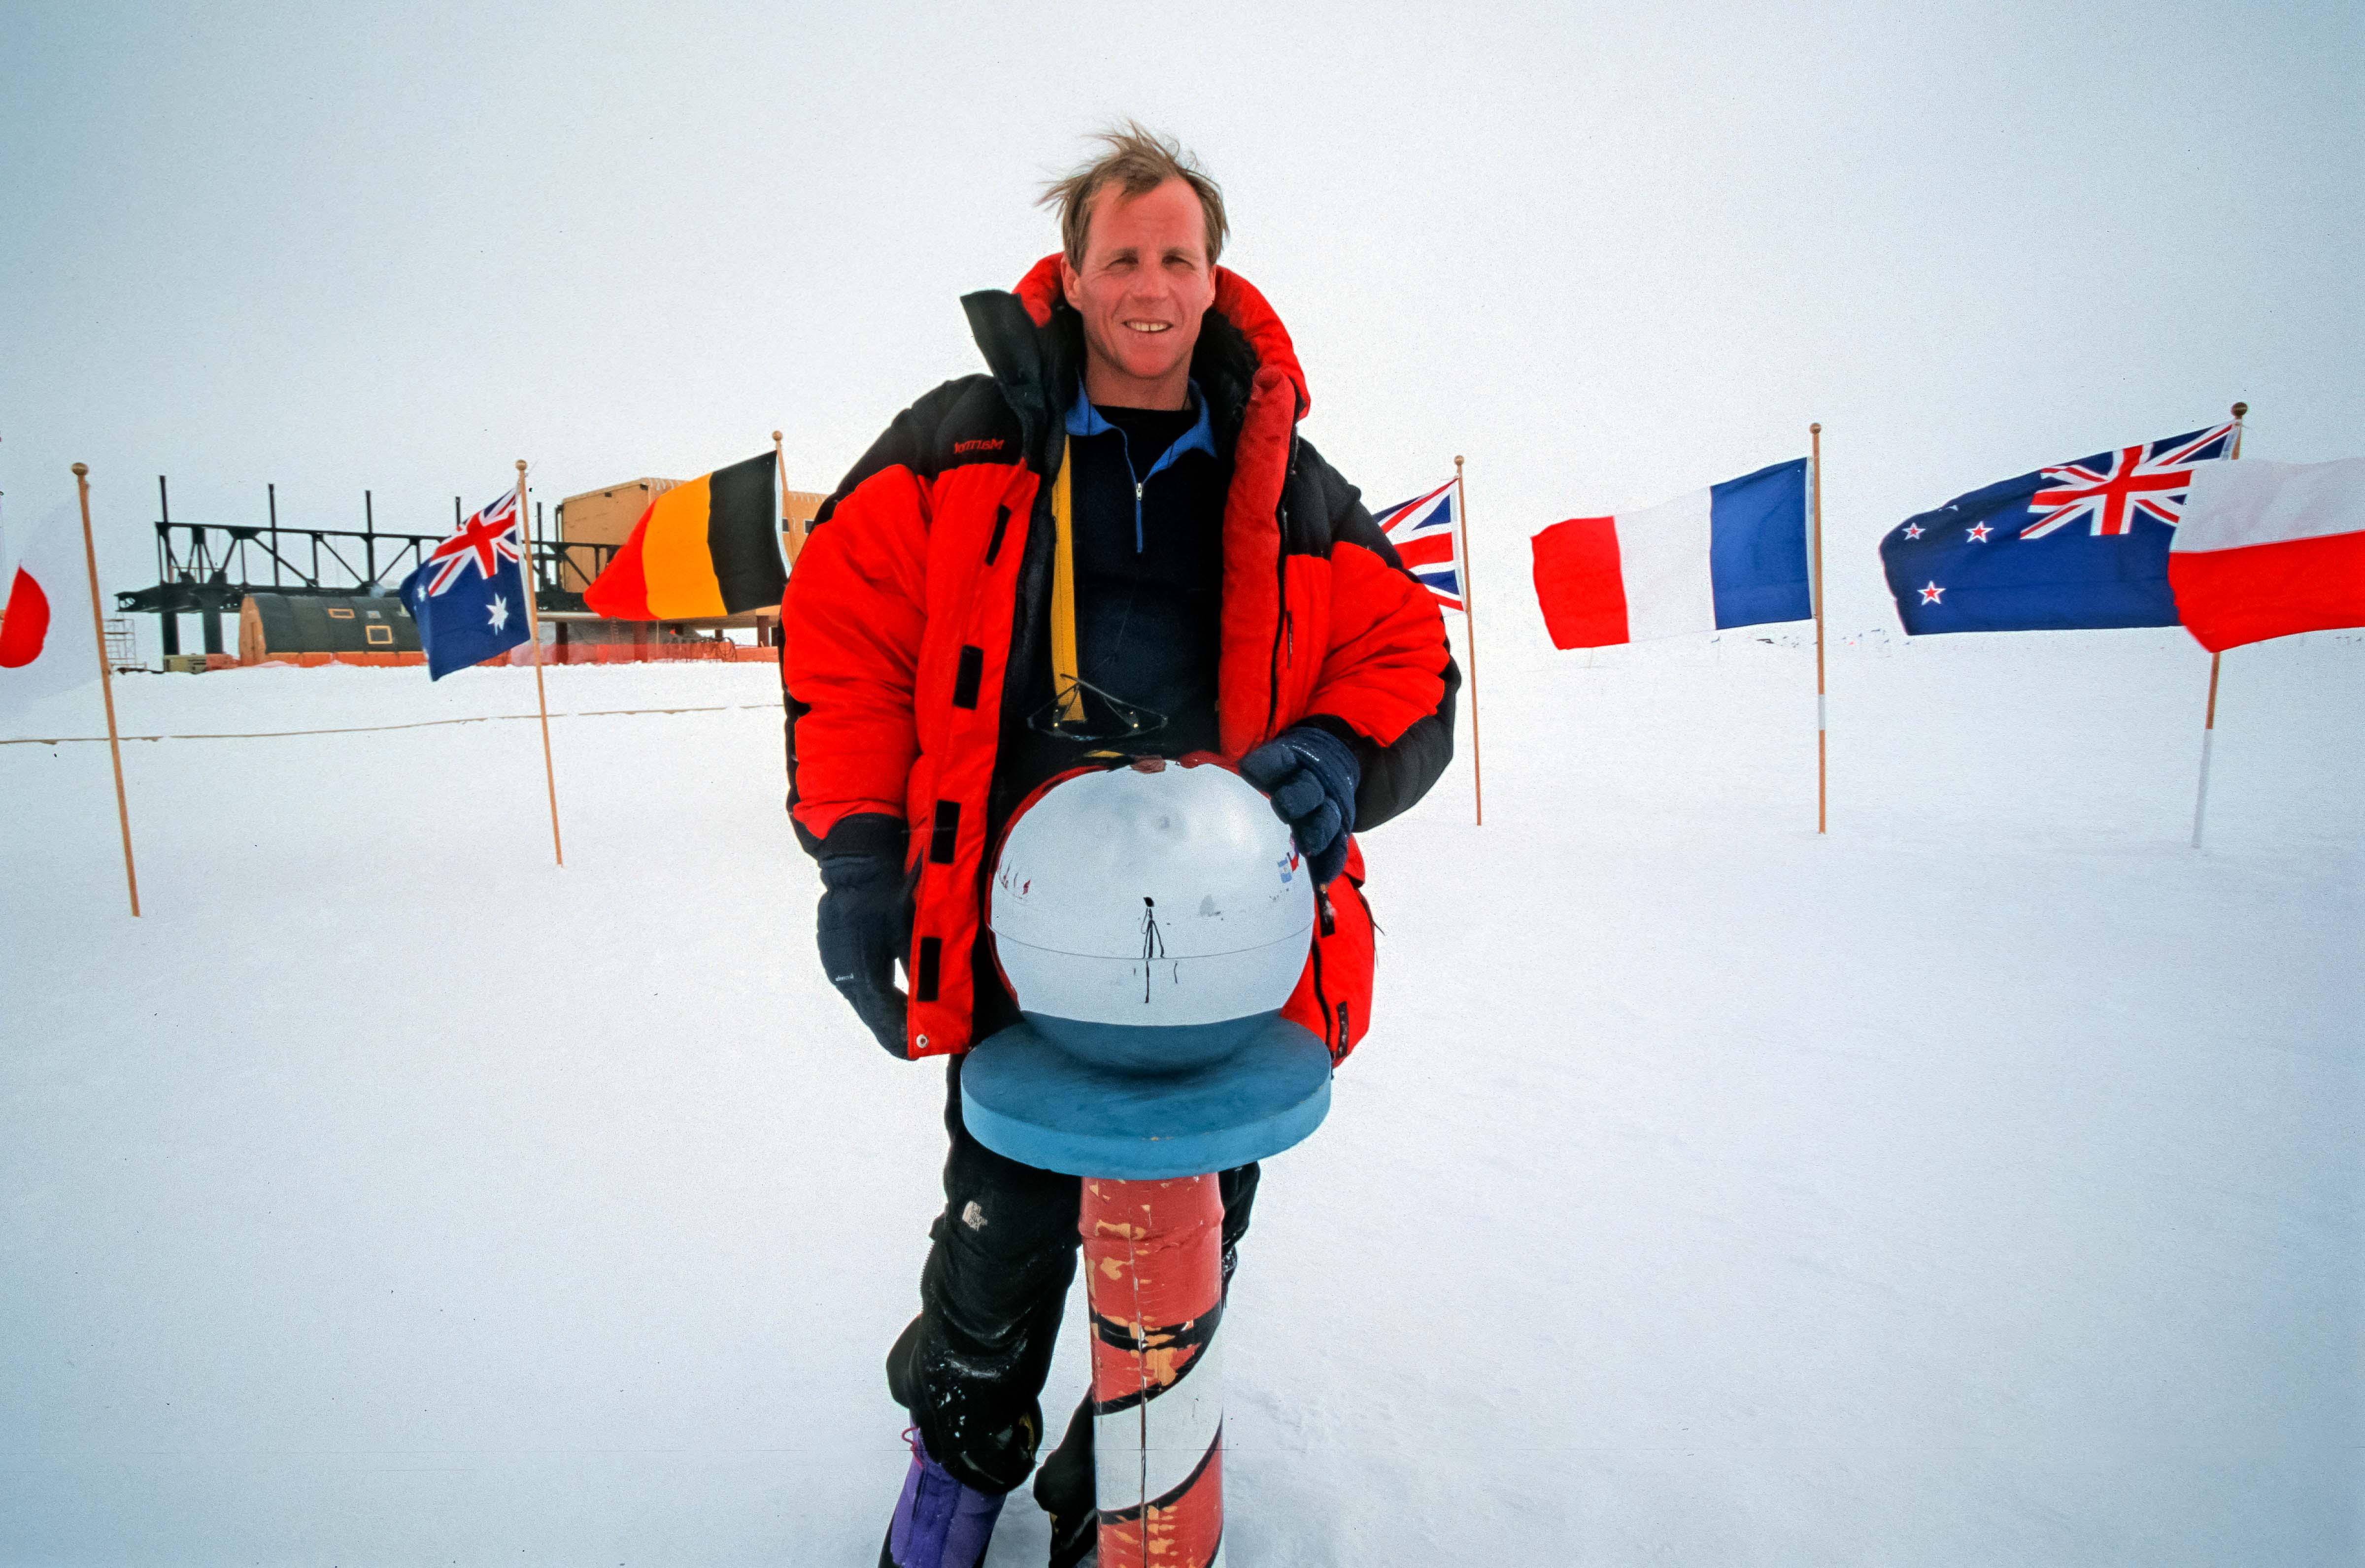 Antarctica, Jeff Shea at South Pole with Globe, 2001